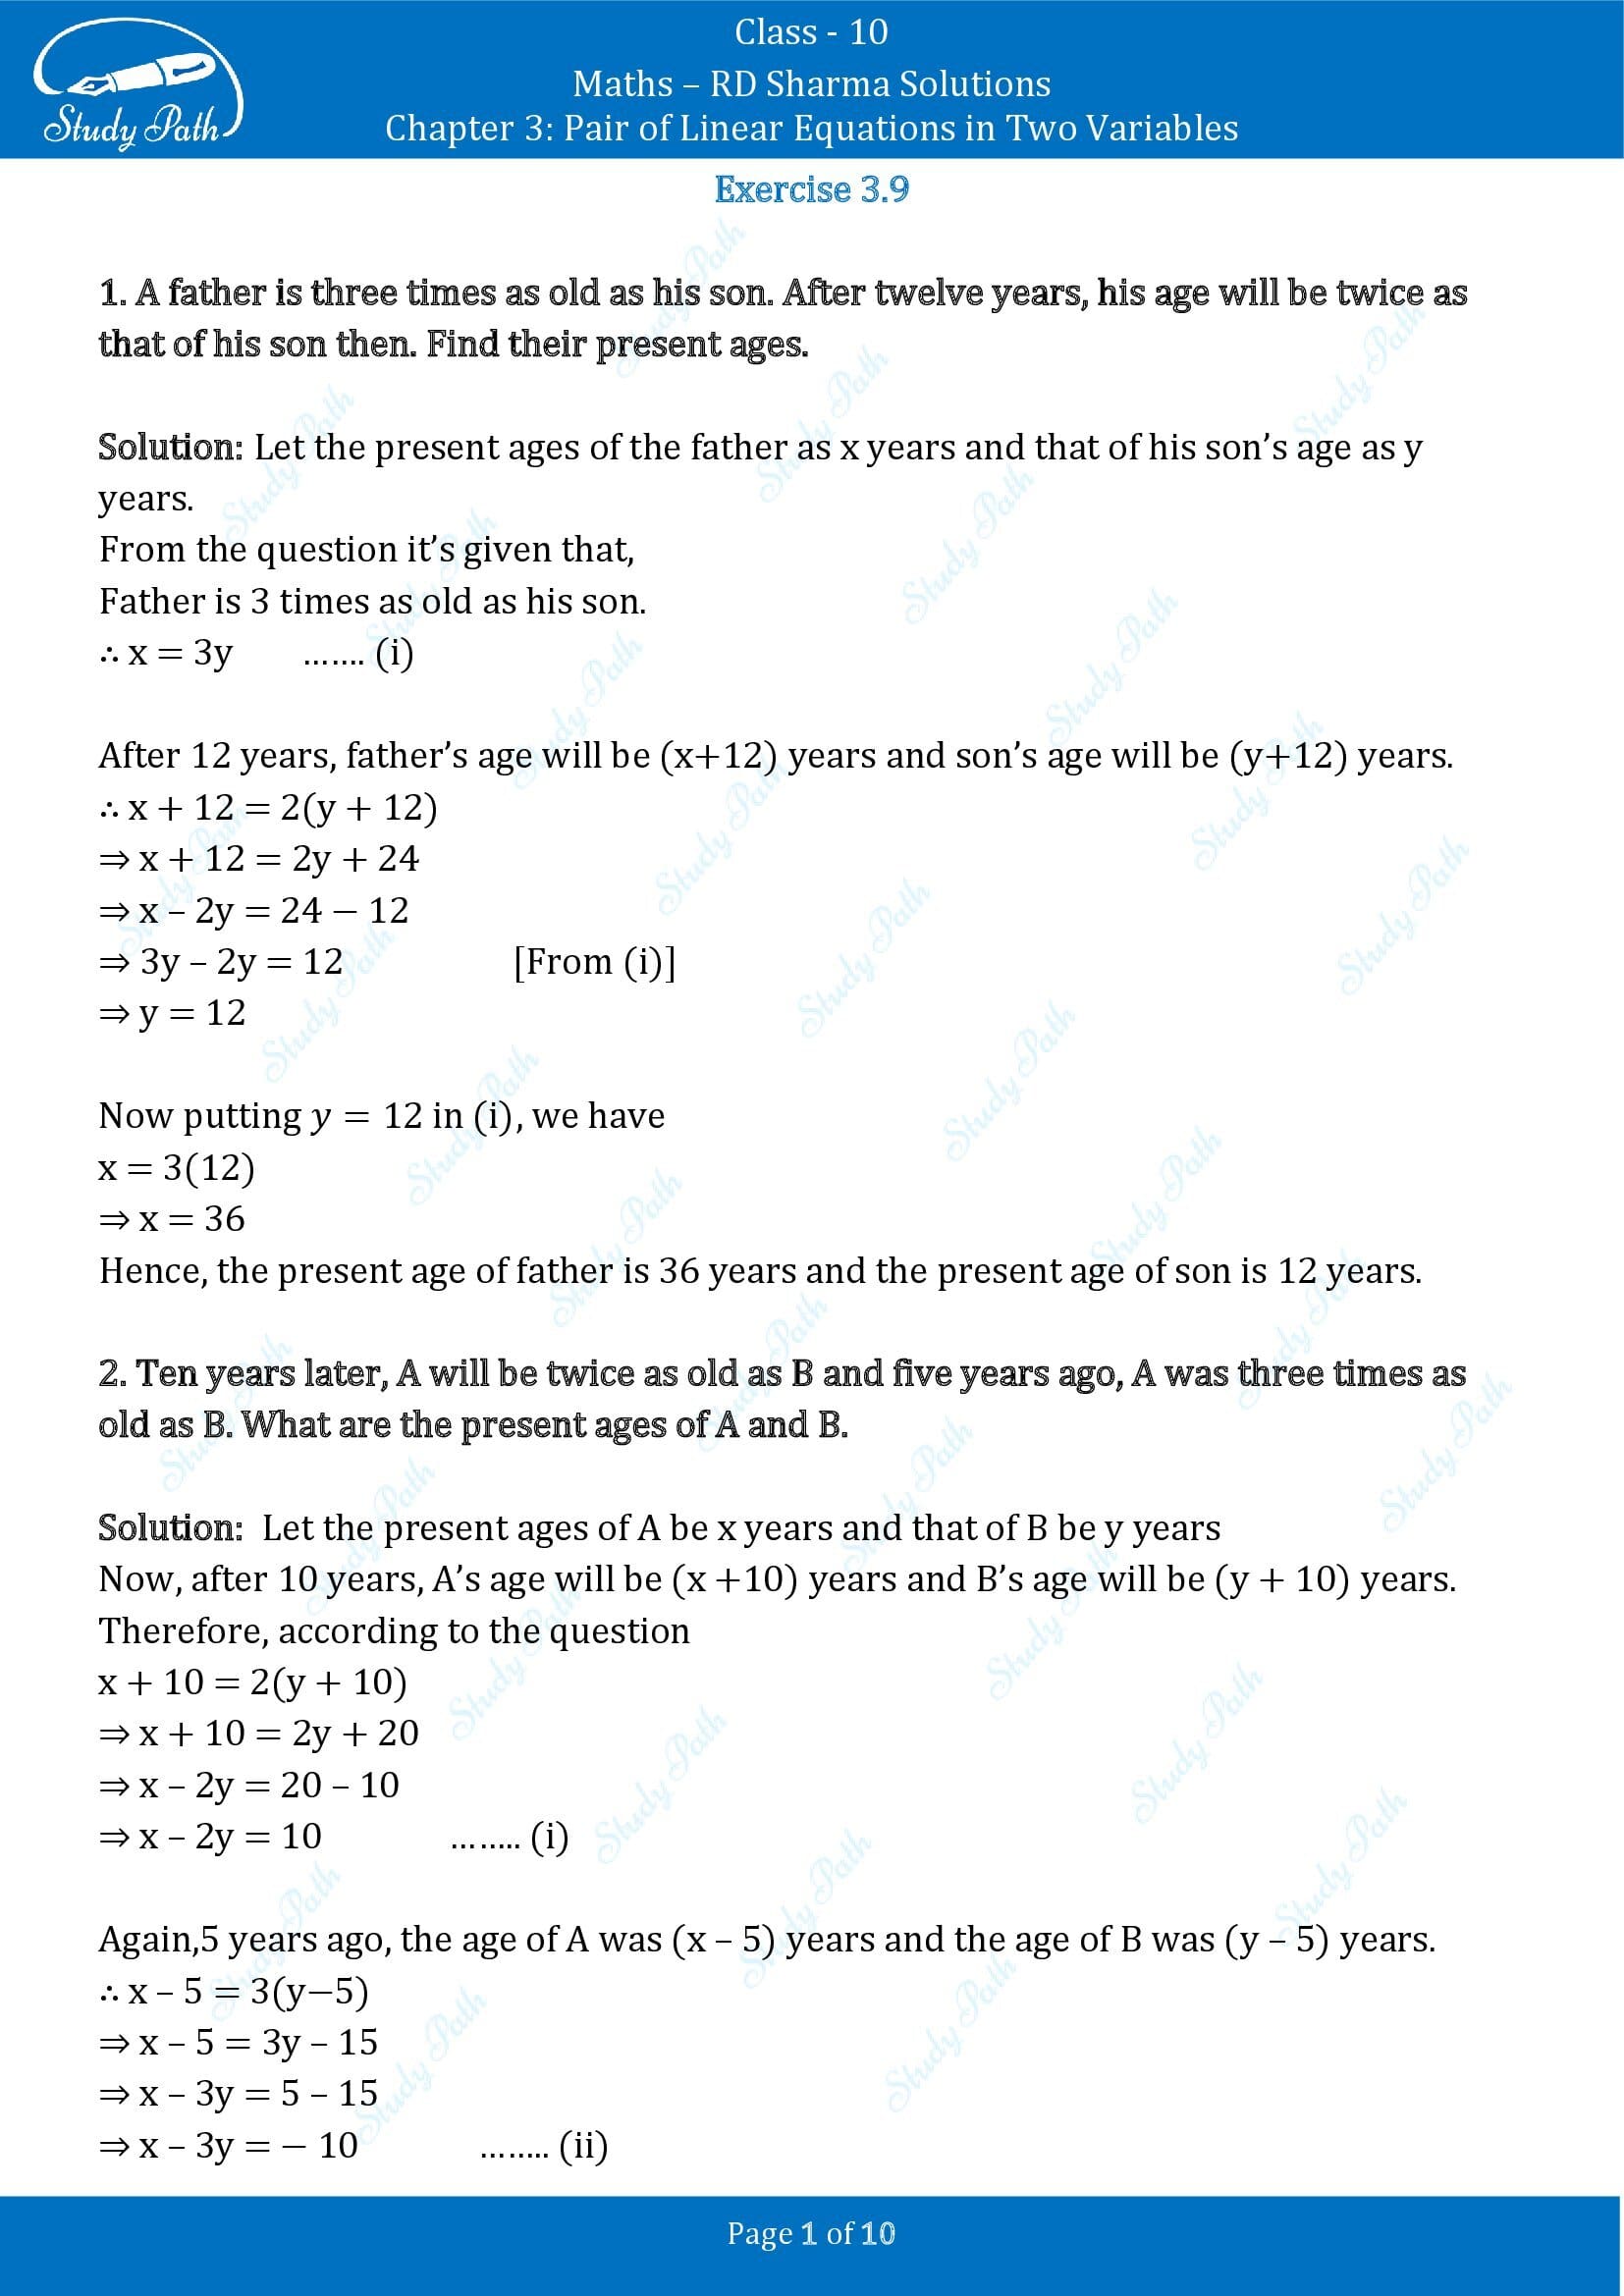 RD Sharma Solutions Class 10 Chapter 3 Pair of Linear Equations in Two Variables Exercise 3.9 00001